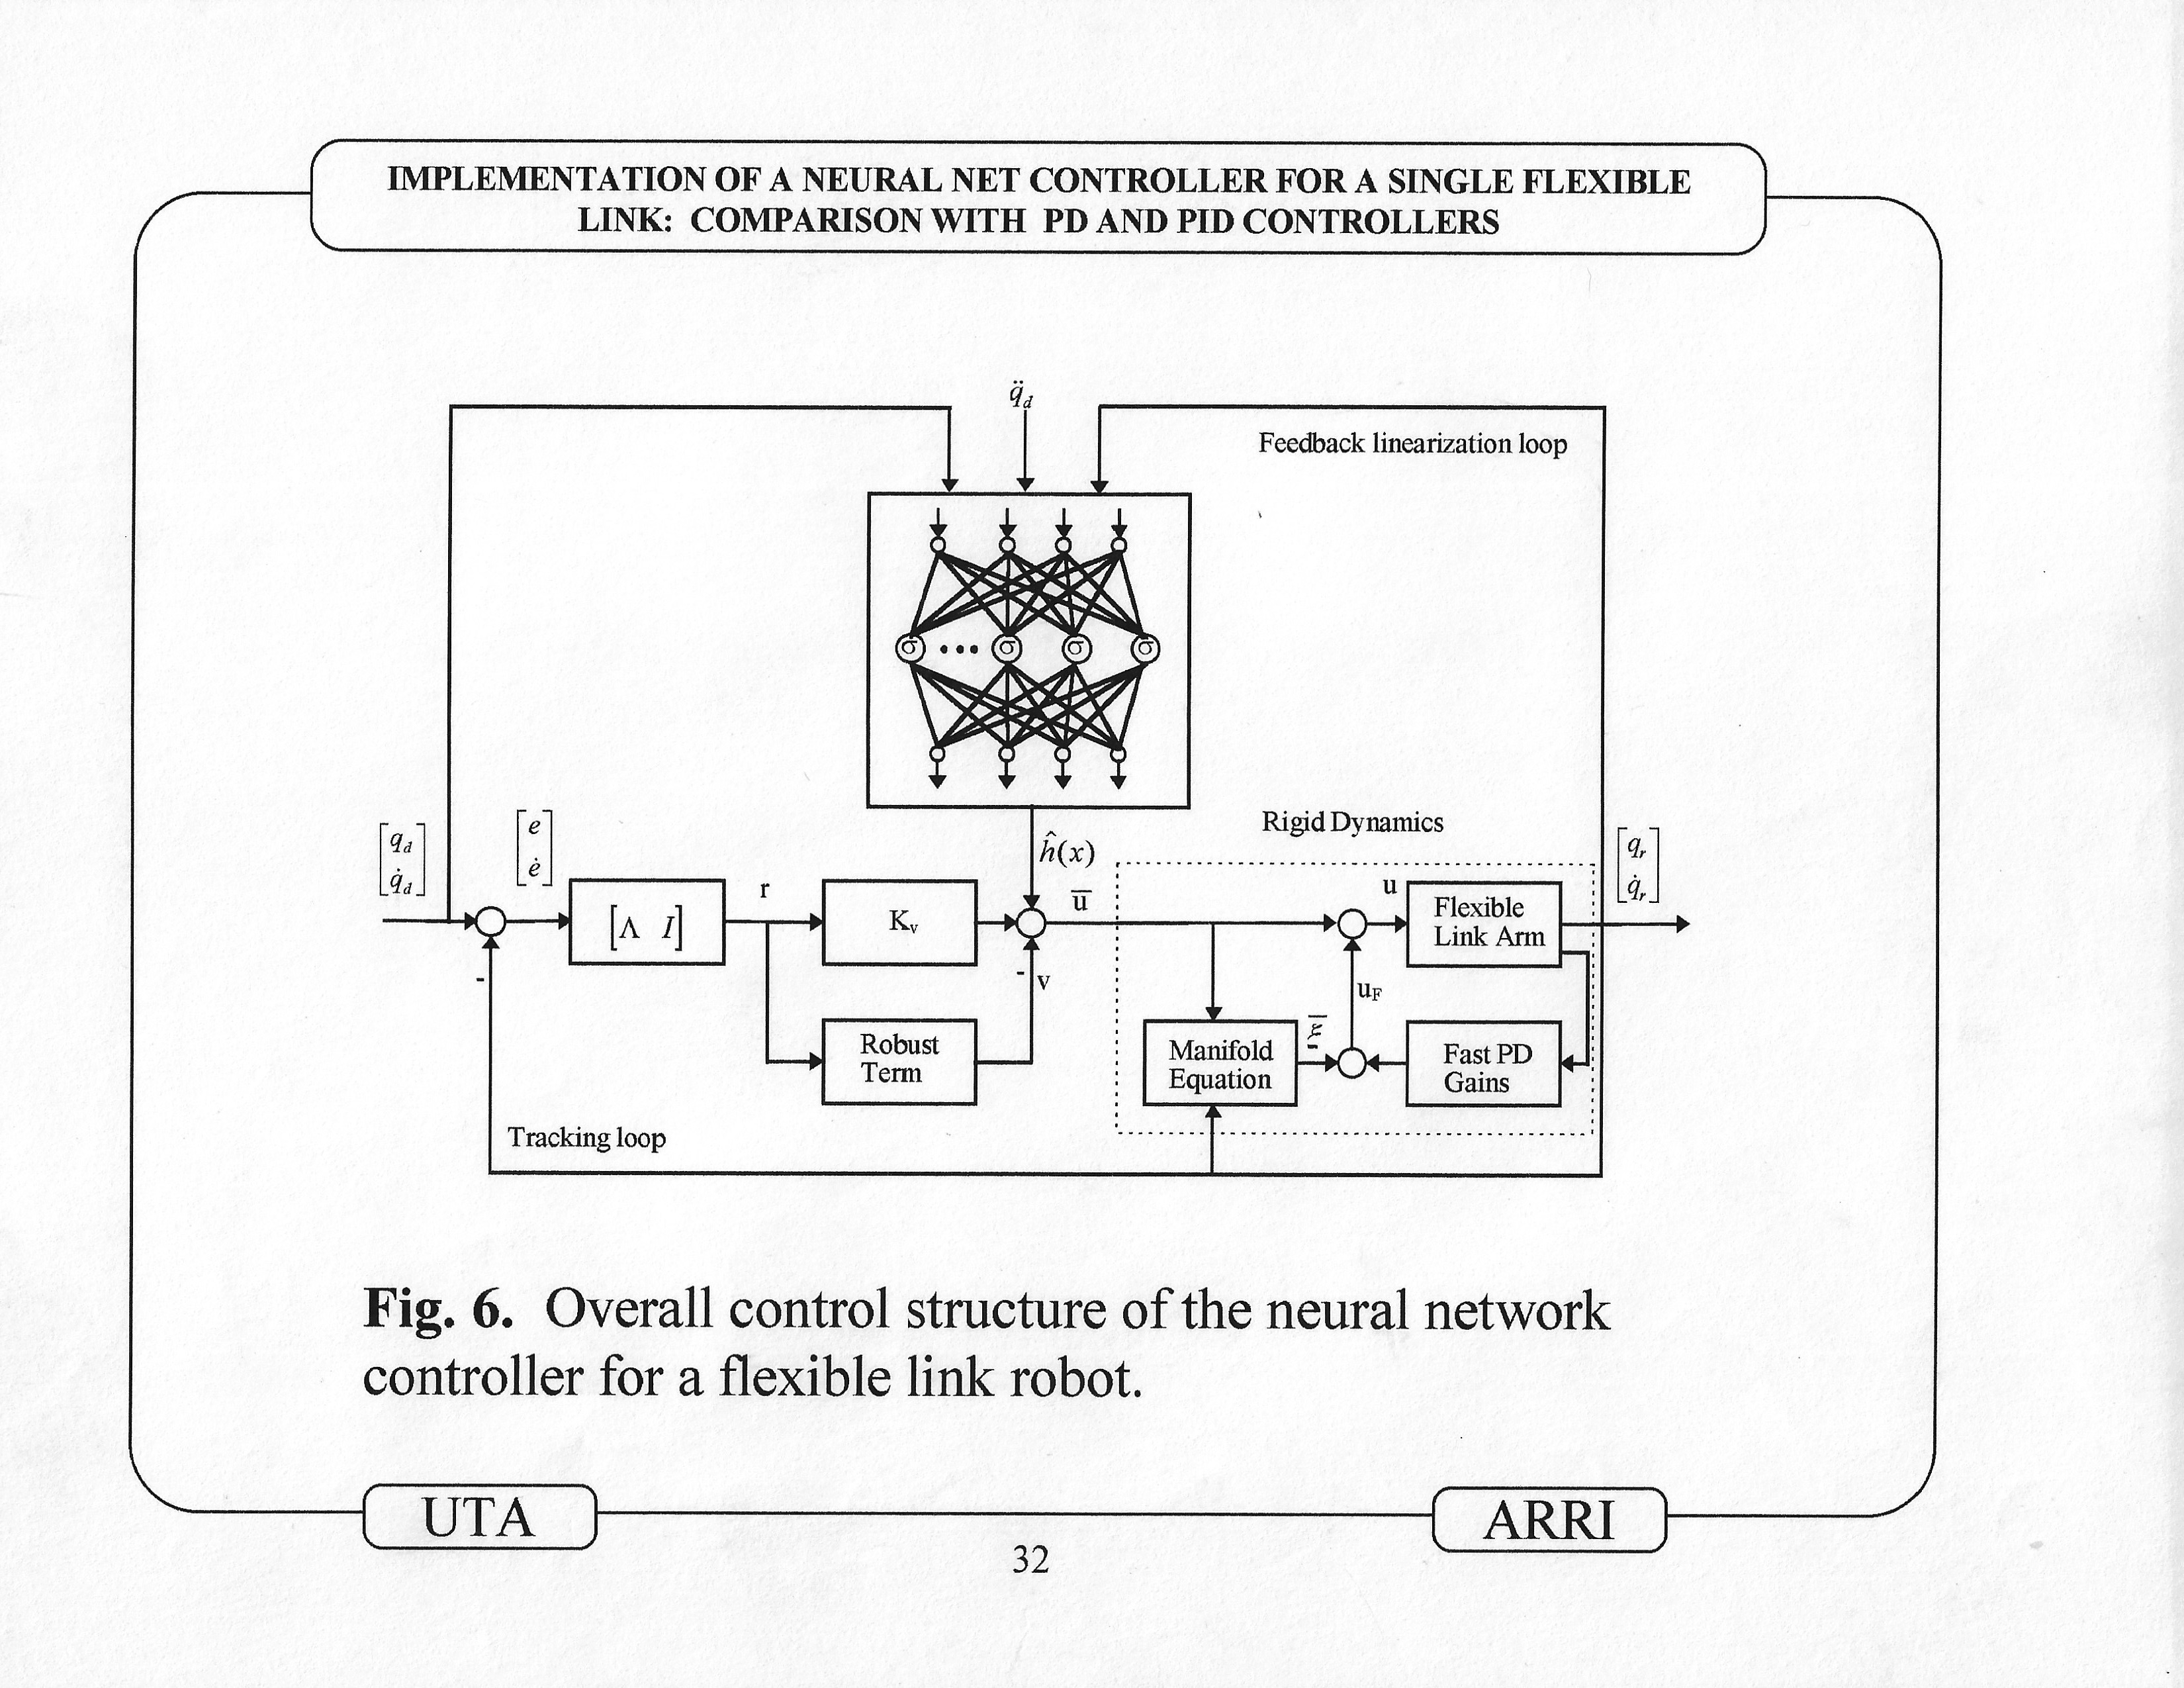 960724_Gutierrez_1996_Implementation_of_a_Neural_Net_Tracking_Controller_for_a_Single_Flexible_Link_Comparison_with_PD_and_PID_controllers_presentation_31